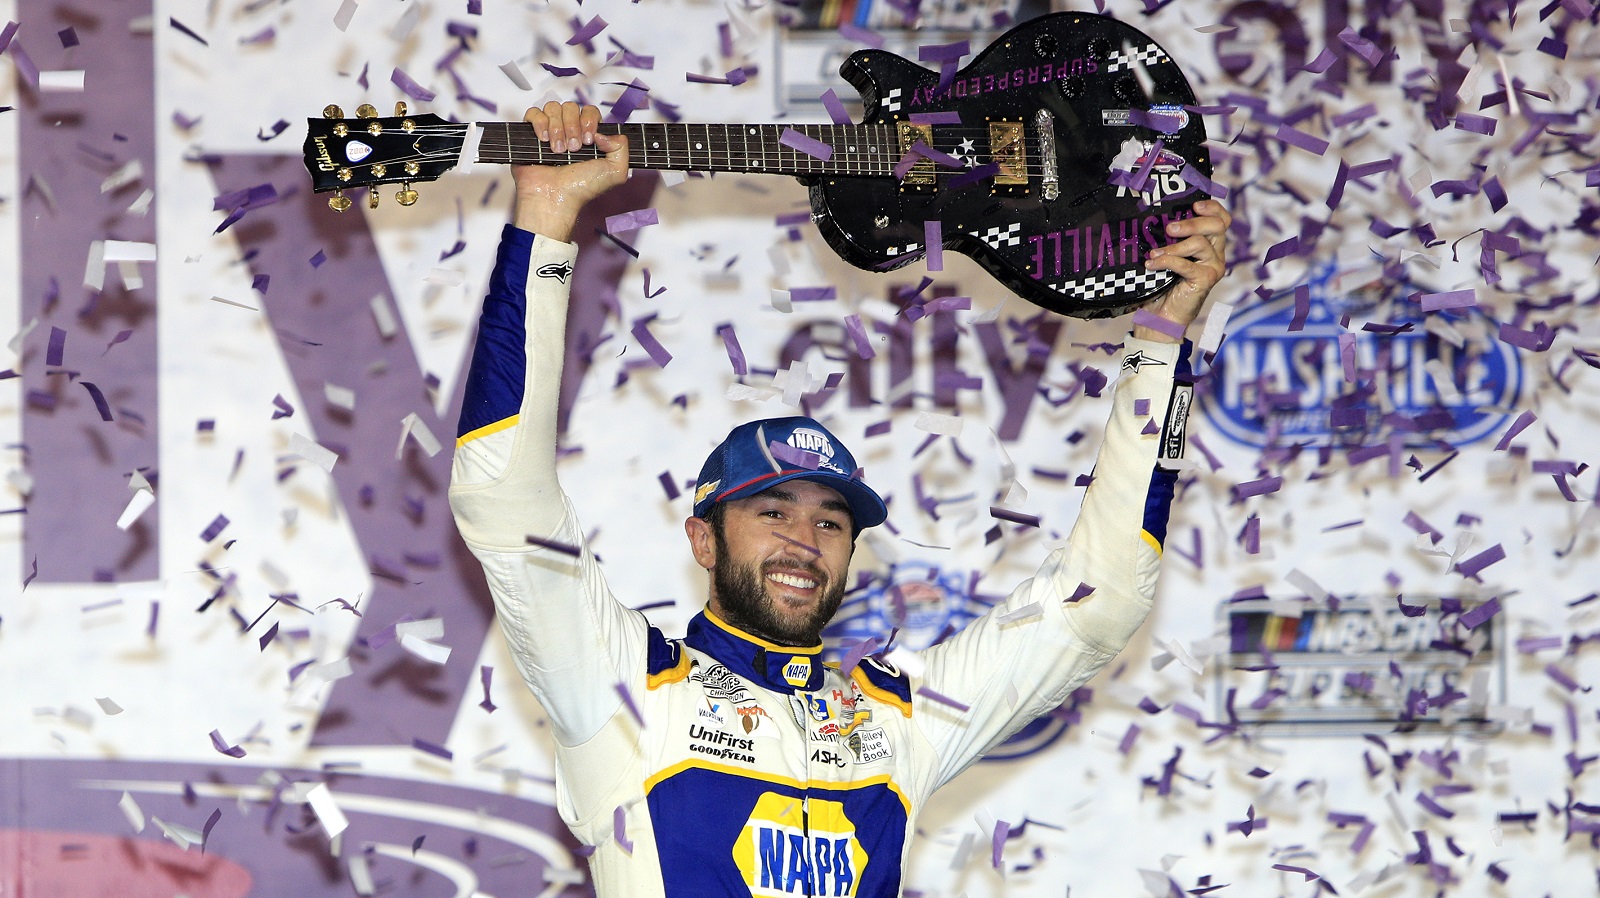 Chase Elliott Earns 2 Sets of Valuable Points at Nashville as We Start Thinking Playoffs